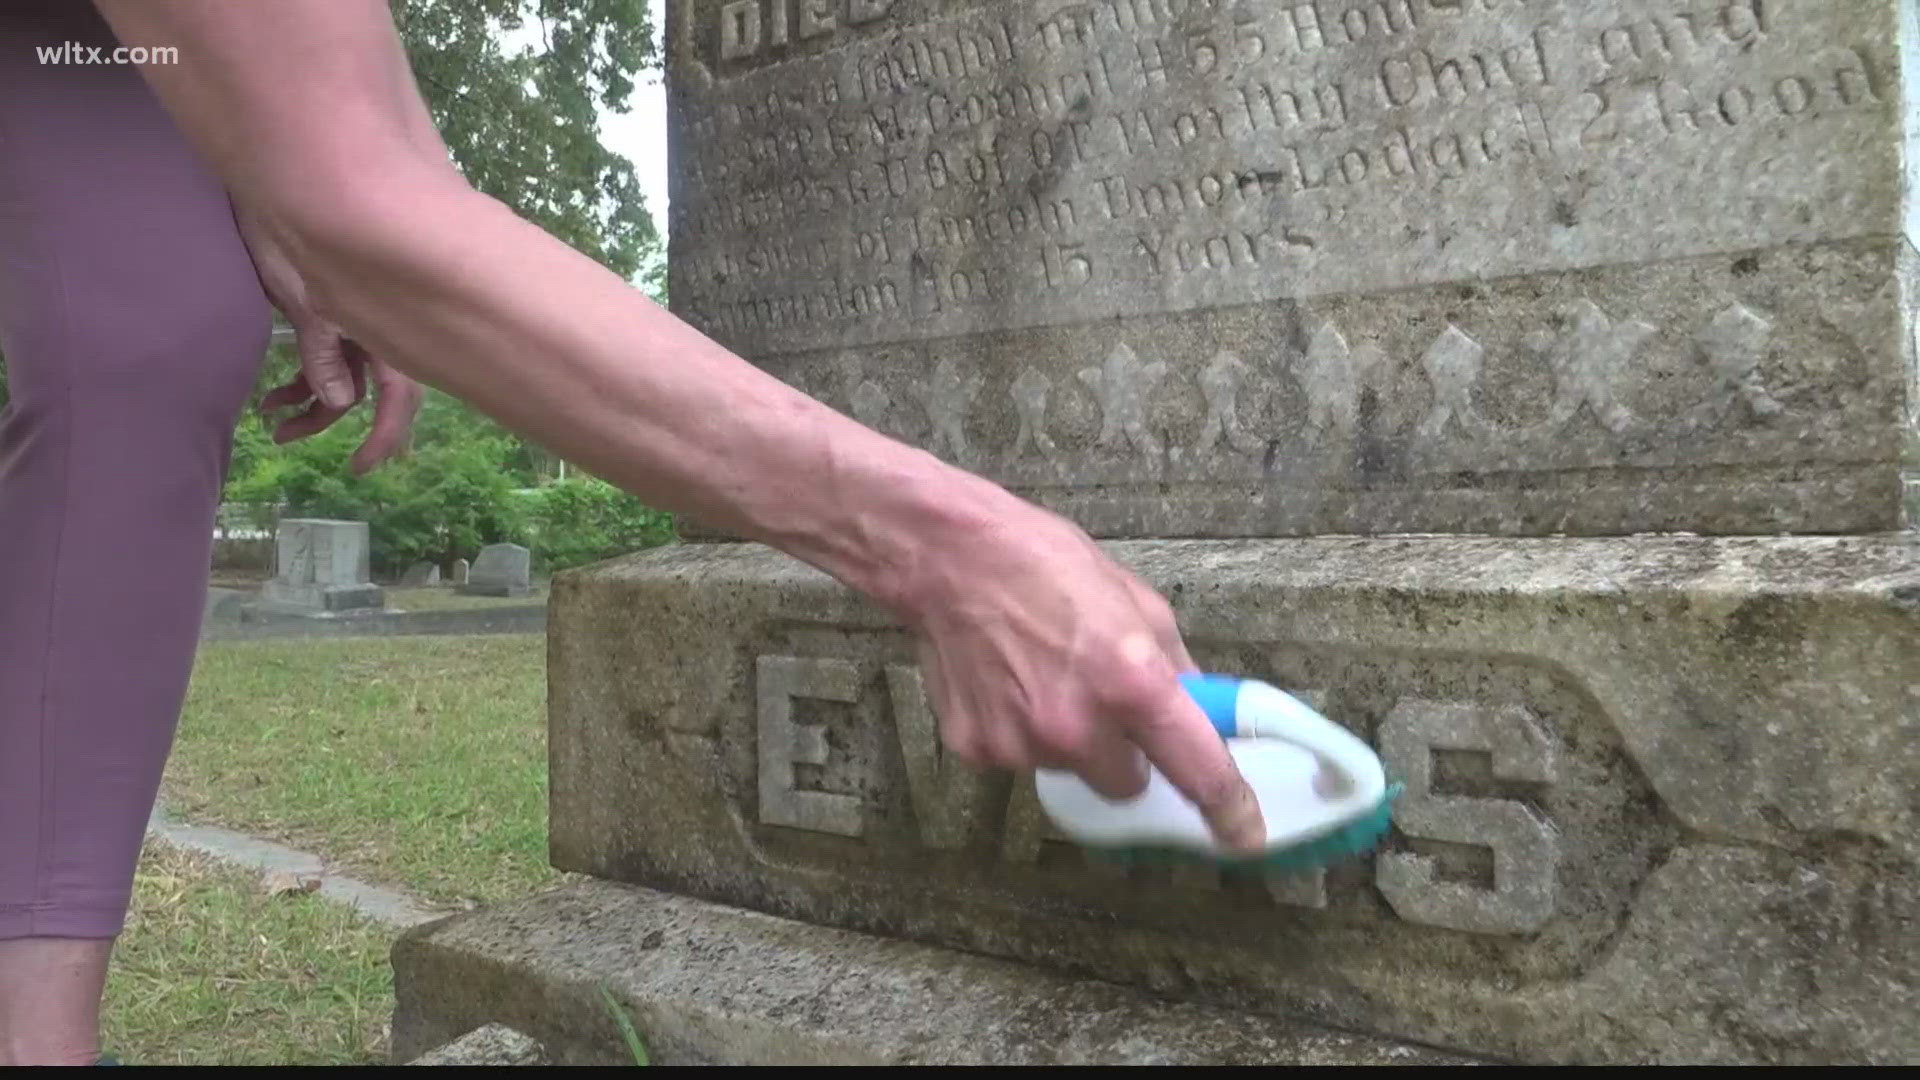 Residents came together for National Historic Preservation Month at Randolph Cemetery.